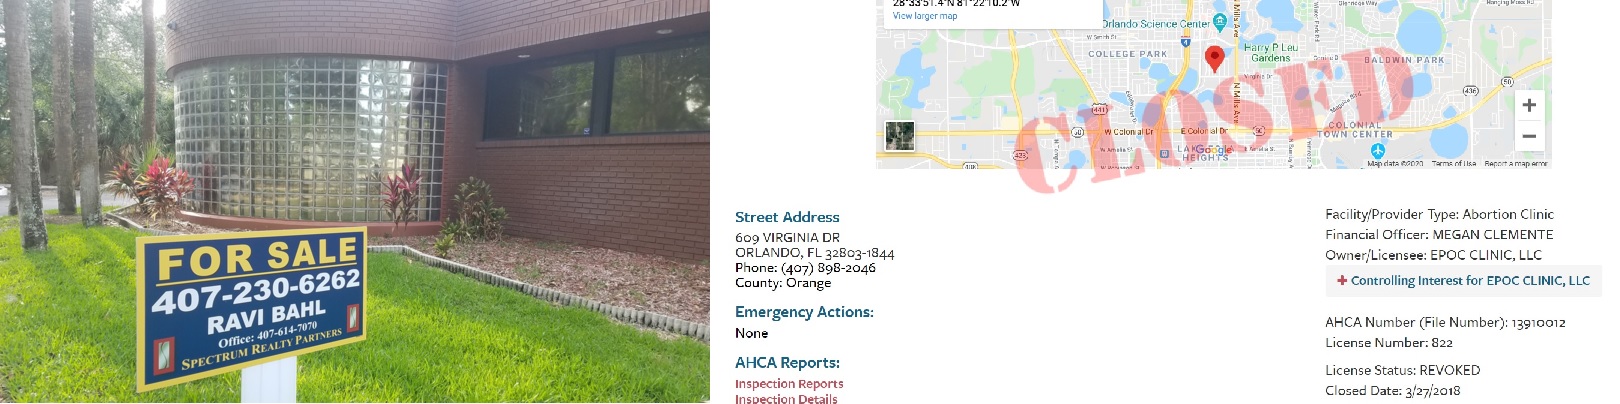 Image: EPOC abortion clinic building owned by James Pendergraft is for sale